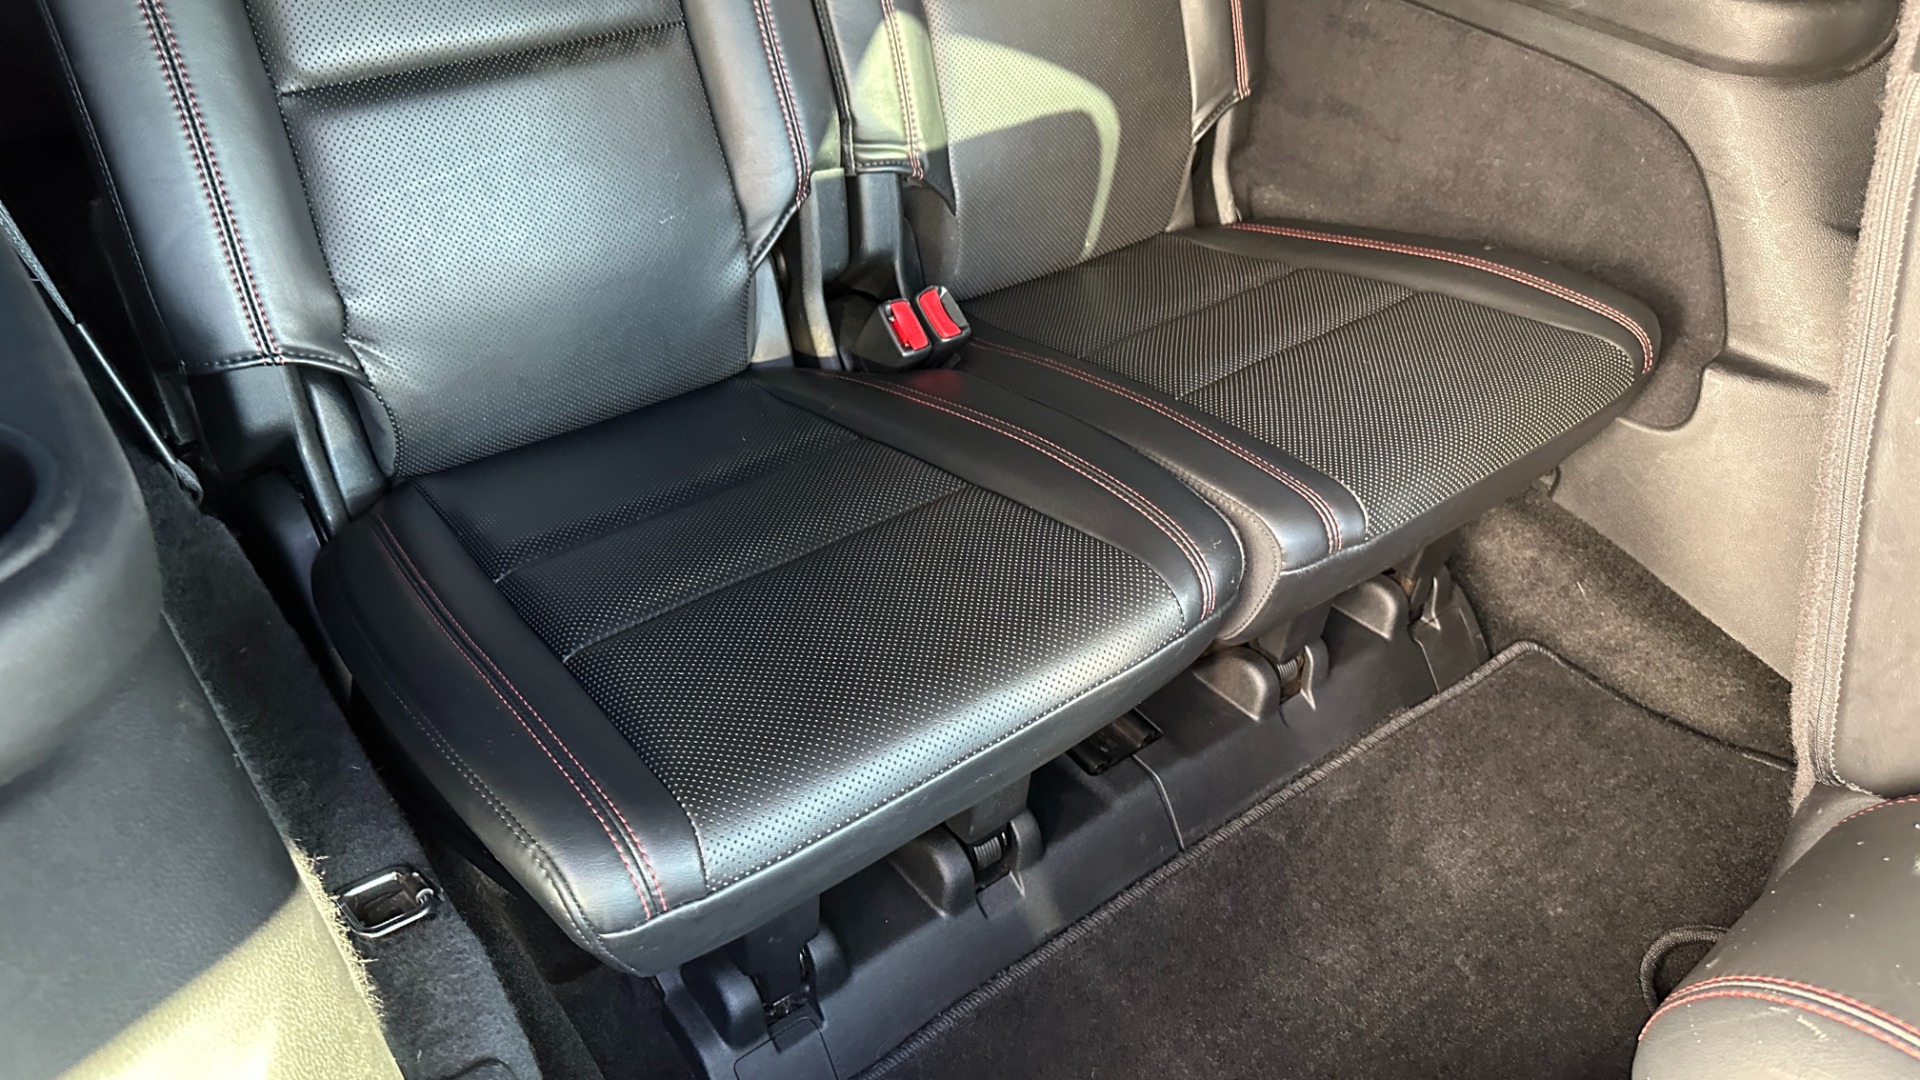 Used 2015 Dodge Durango R/T / HEMI V8 / CAPTAINS CHAIRS / 3 ROW SEATING / TECH PKG / NAPPA LEATHER  for sale Sold at Formula Imports in Charlotte NC 28227 38